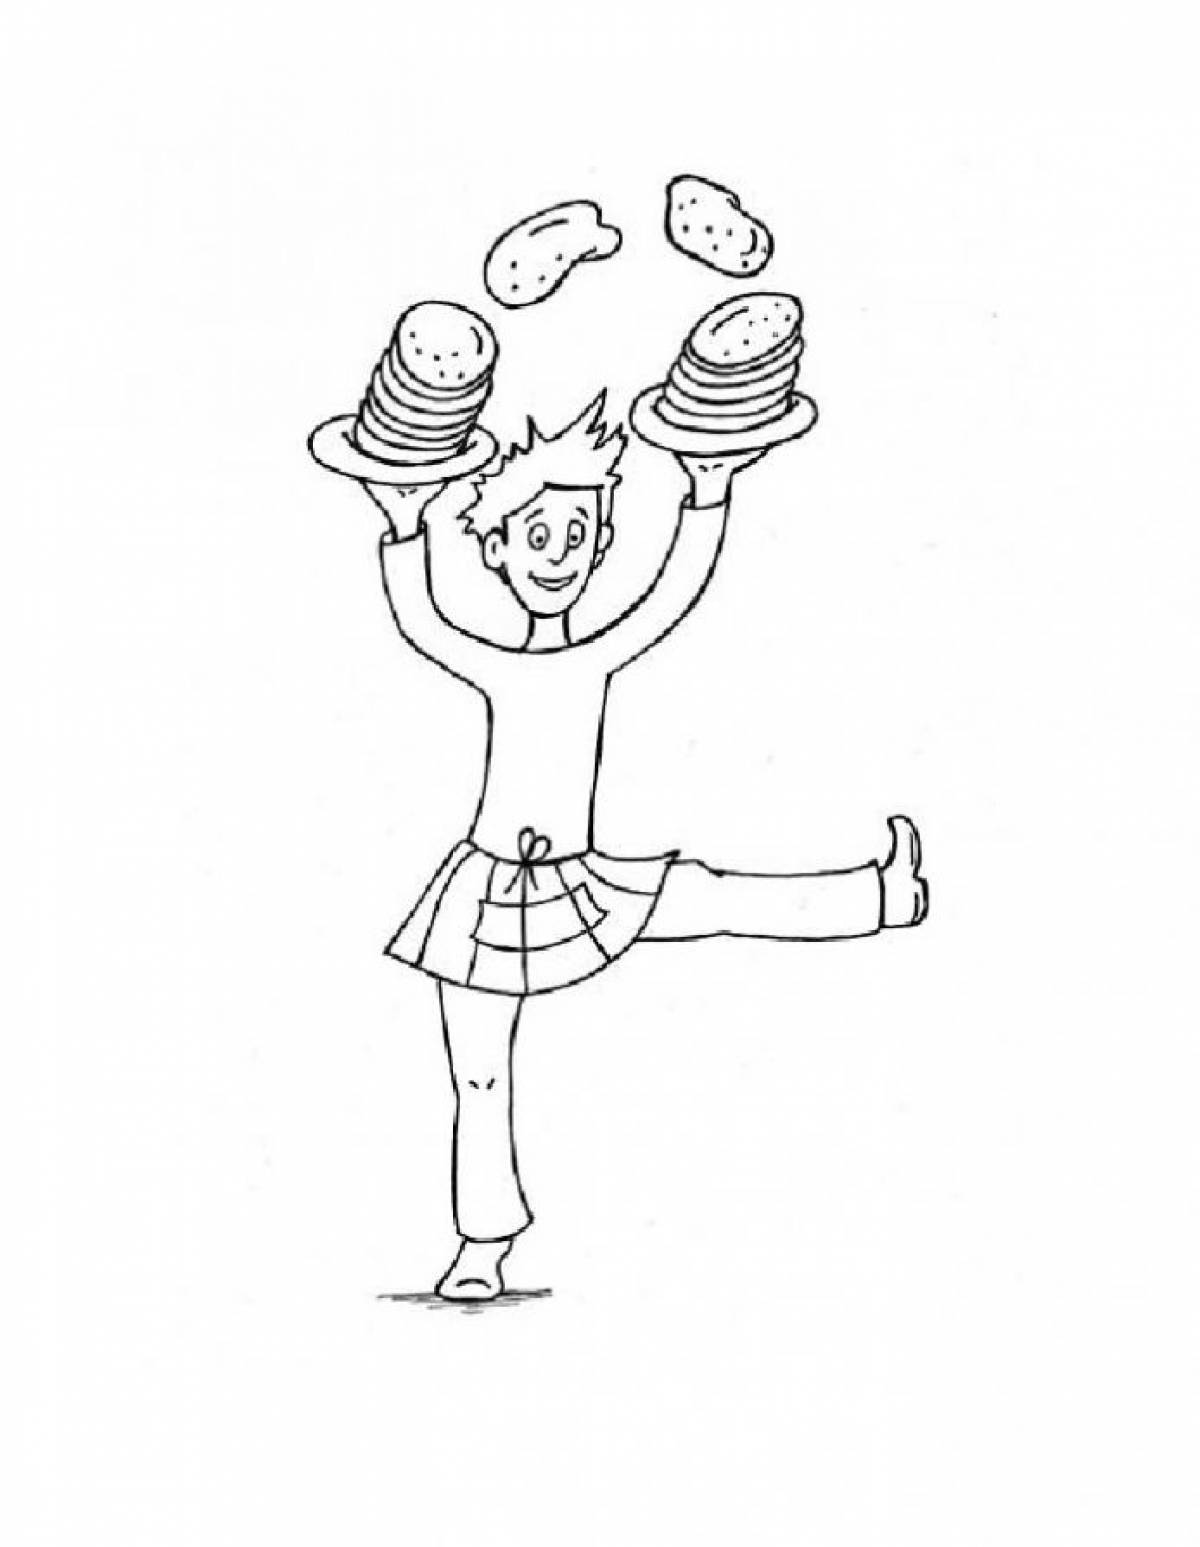 Boy with pancakes